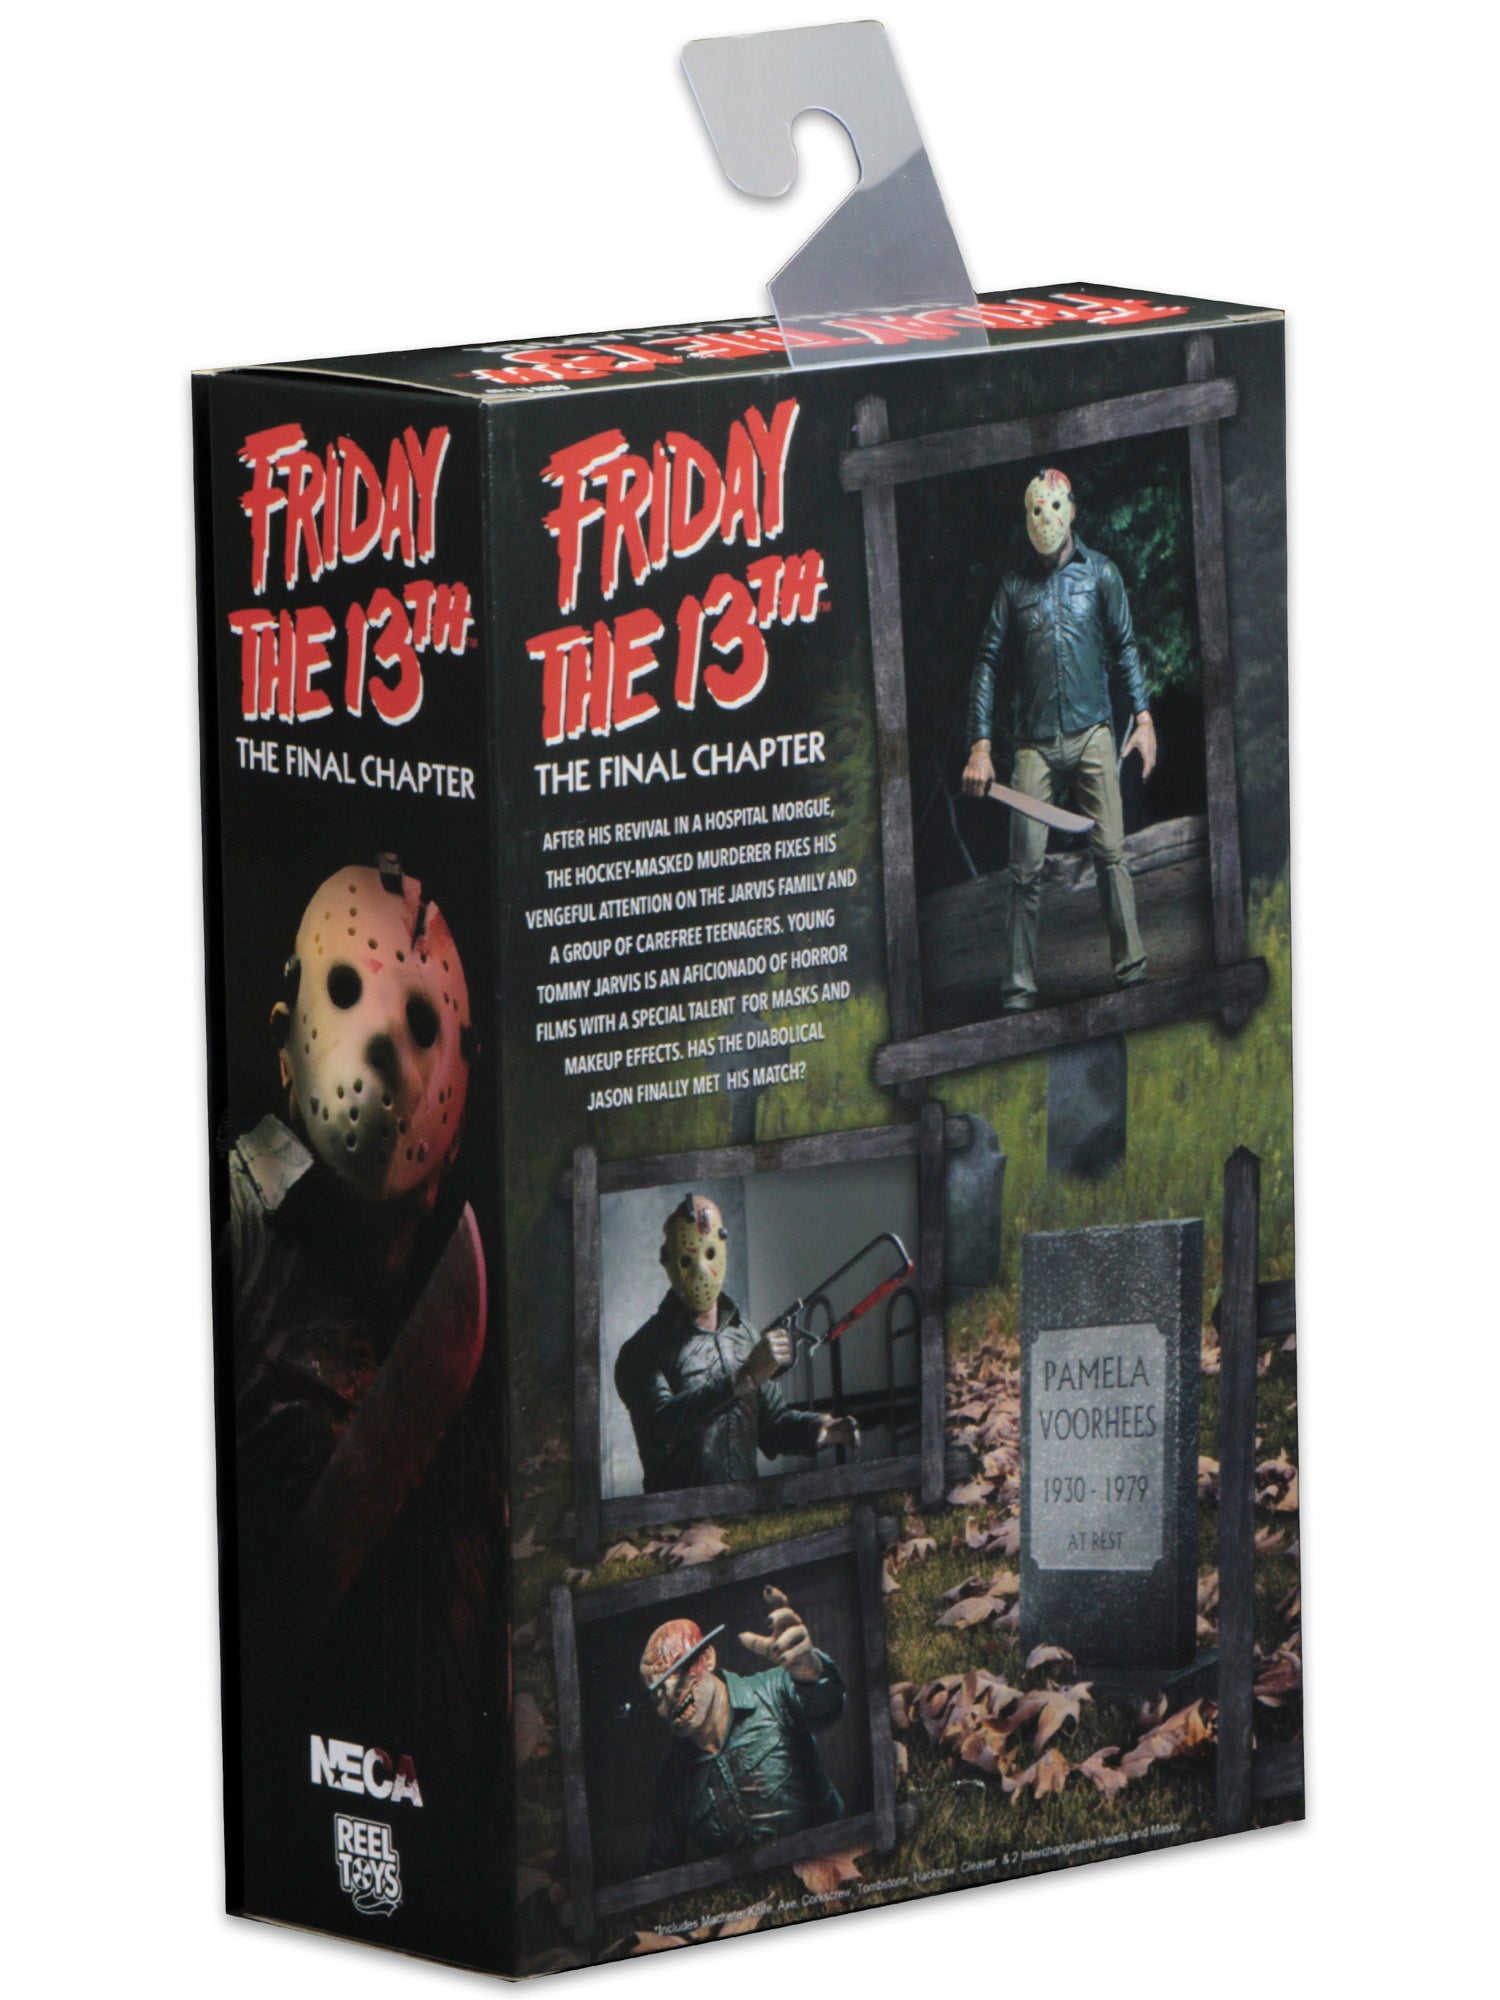 NECA - Friday the 13th - 7" Action Figure - Ultimate Part 4 Jason - costumes.com